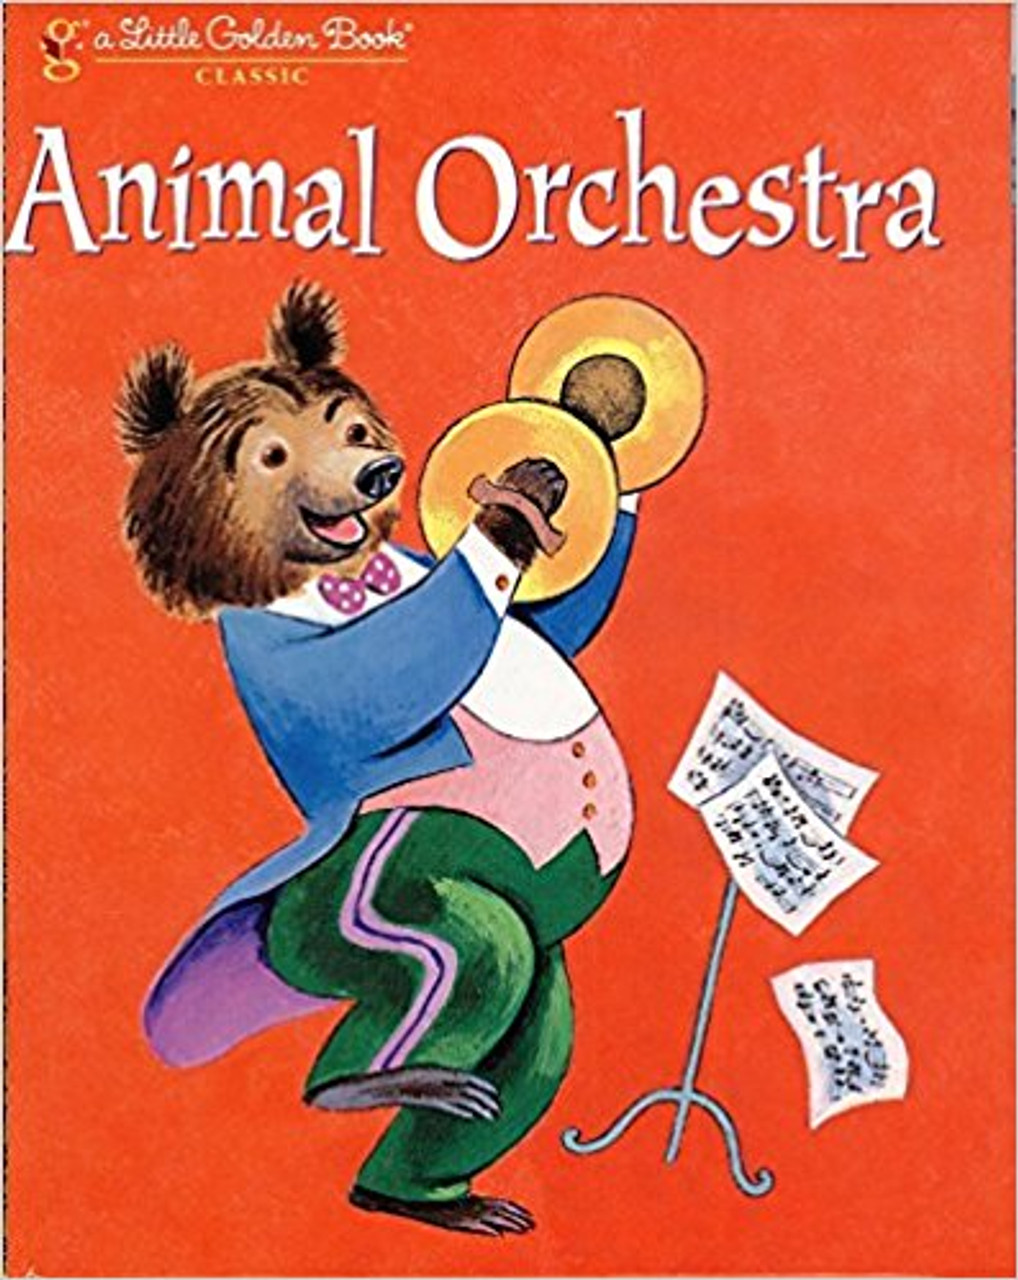 This rhyming story about an animal orchestra and its hippo conductor is perfect for reading aloud. Children will have front-row seats as they imagine the rousing experience of a night at the orchestra!